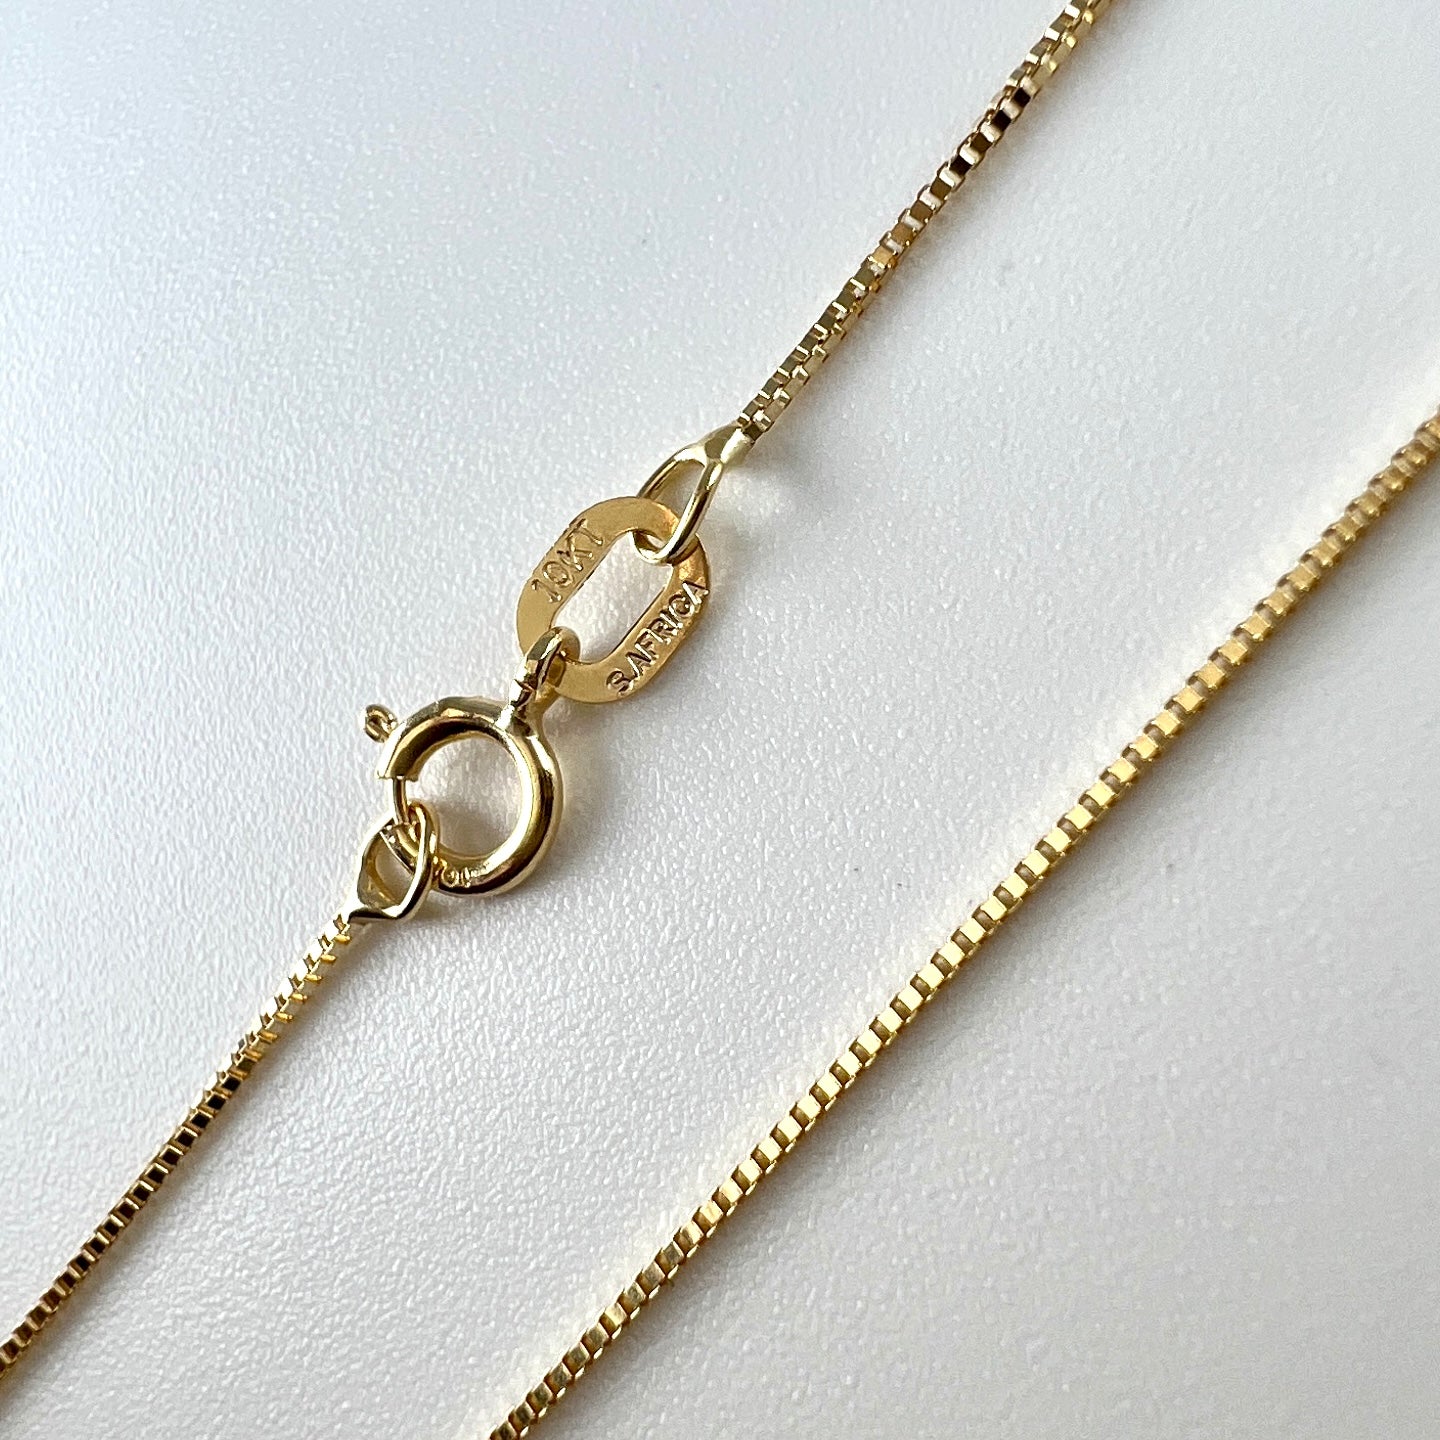 10K Yellow Gold 18" Box Link Chain Necklace